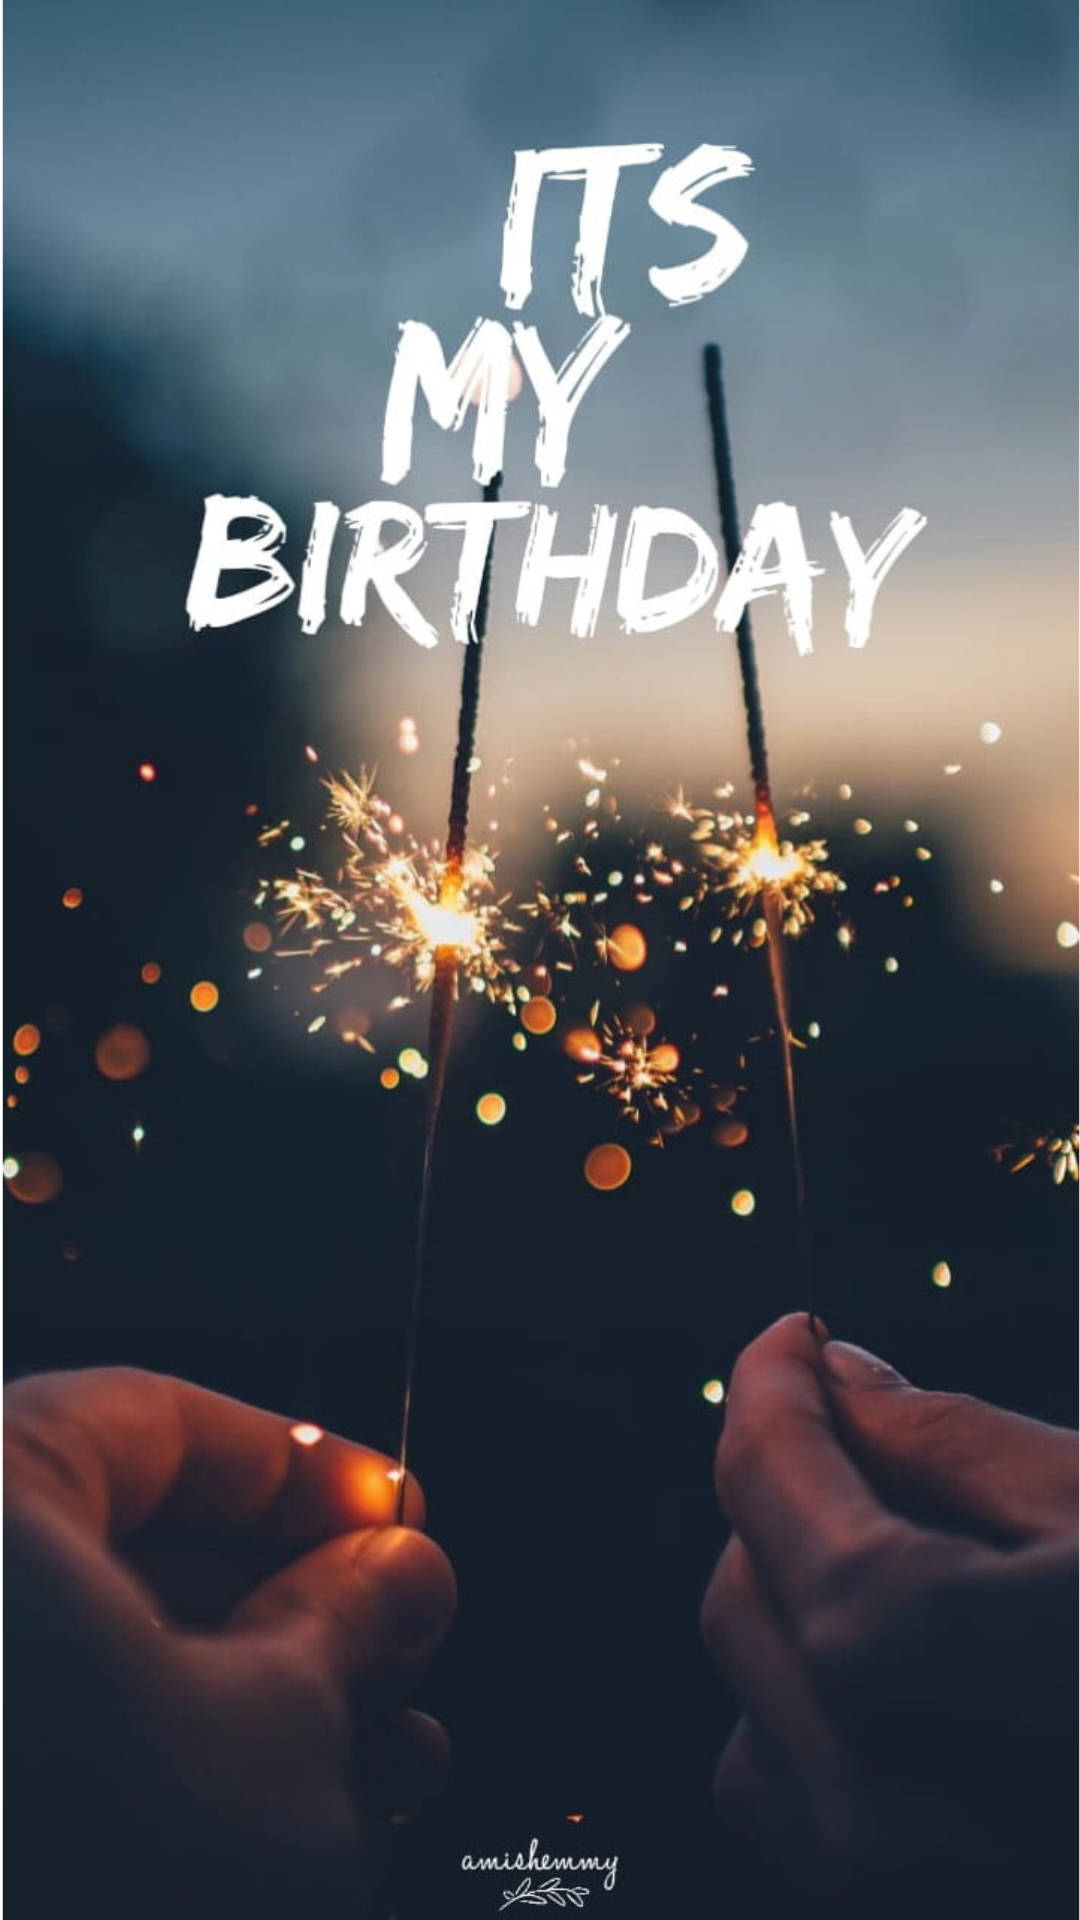 Free My Birthday Wallpaper Downloads, [100+] My Birthday Wallpapers for  FREE 